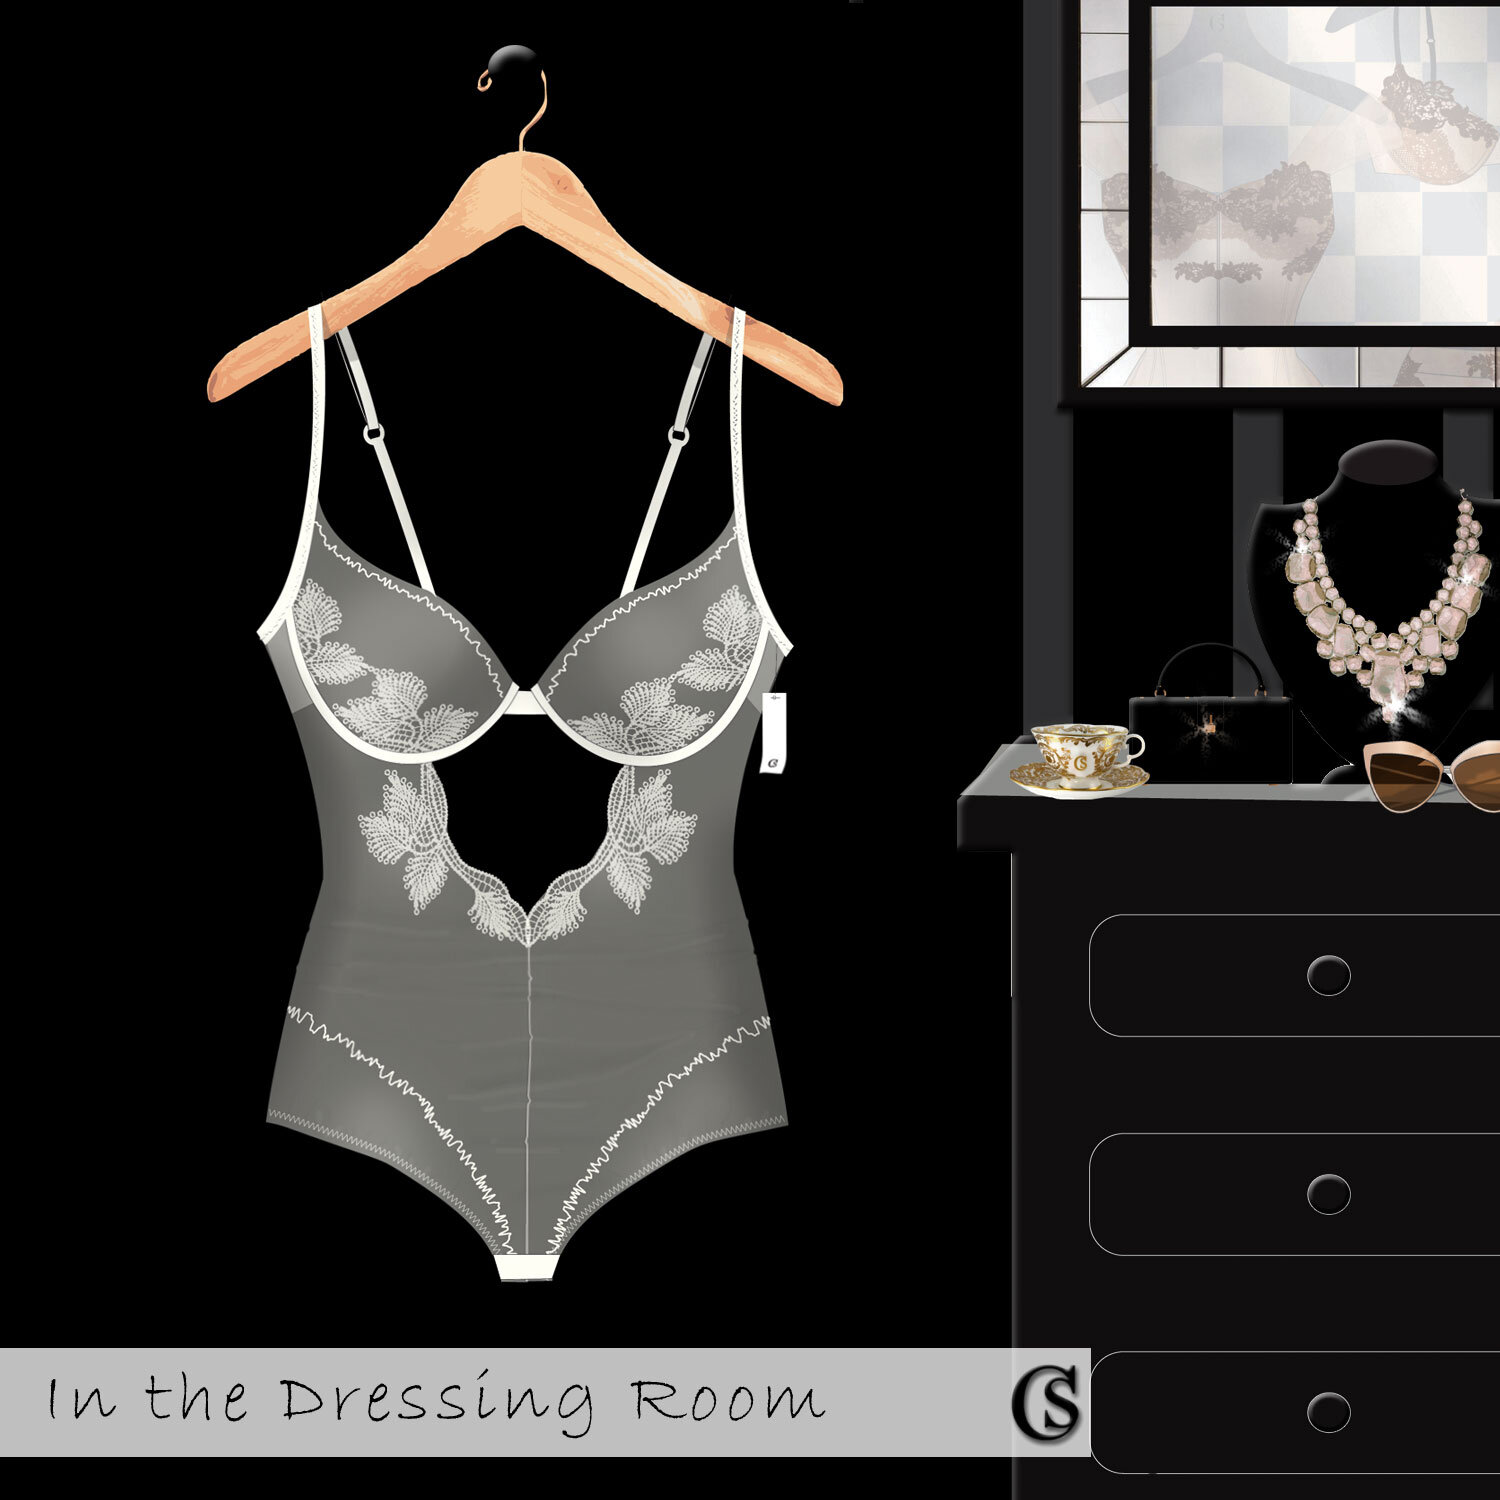 https://images.squarespace-cdn.com/content/v1/523ccbb6e4b0f99c83ed2933/1599055566514-6XDSDLYC0L0AOT6HSMGD/babydoll-lingerie-concepts-2022-in-the-dressing-room-at-chiaristyle.jpg